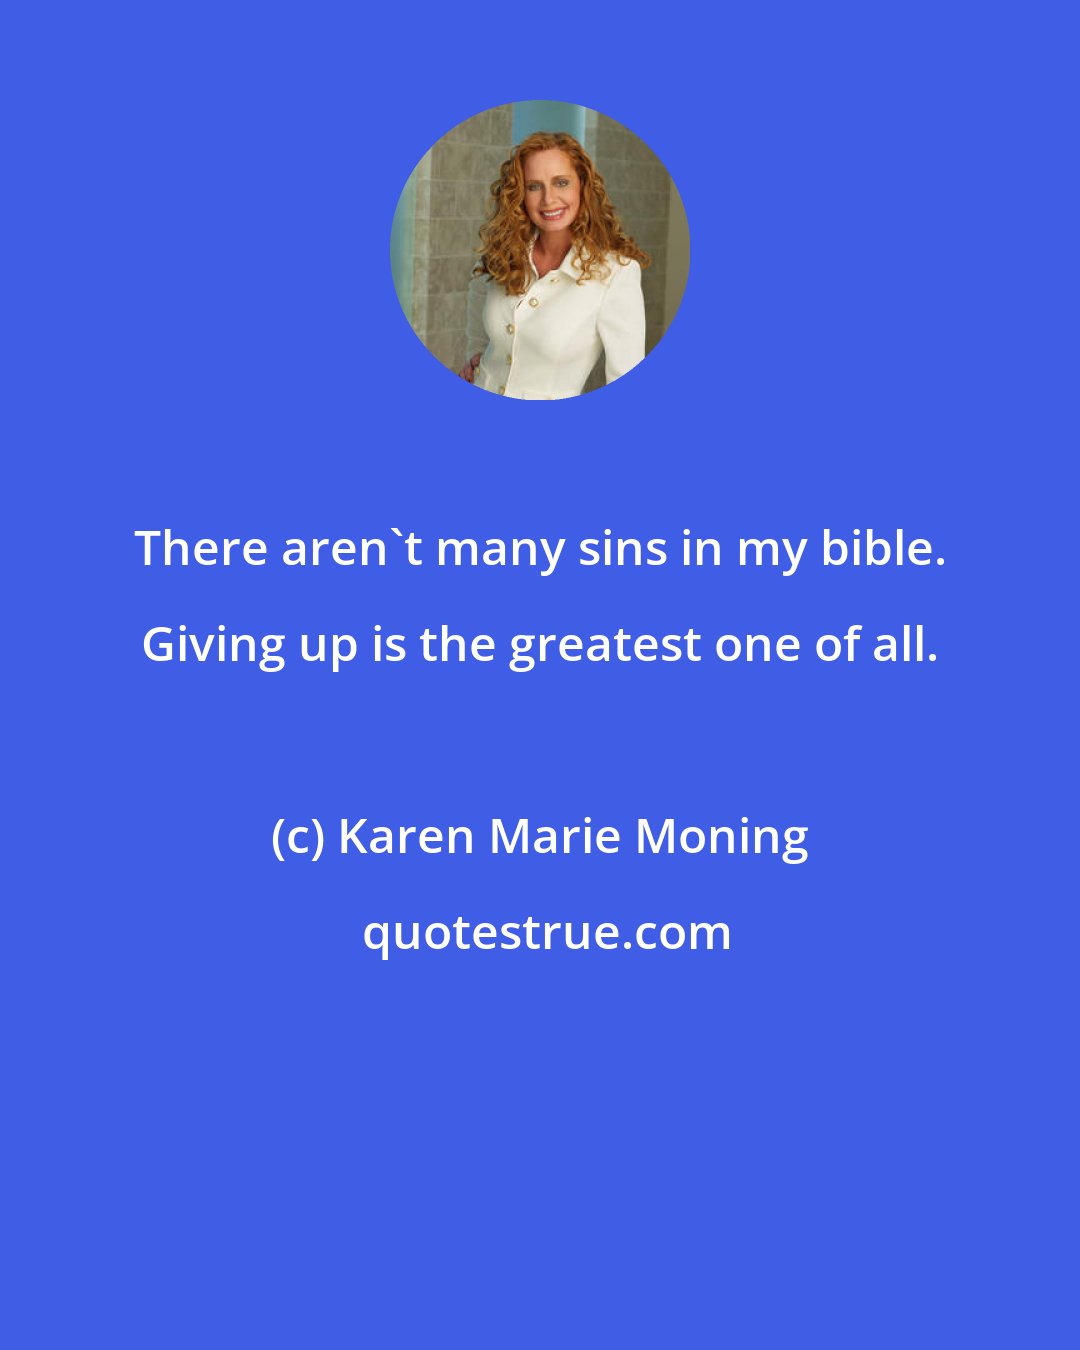 Karen Marie Moning: There aren't many sins in my bible. Giving up is the greatest one of all.